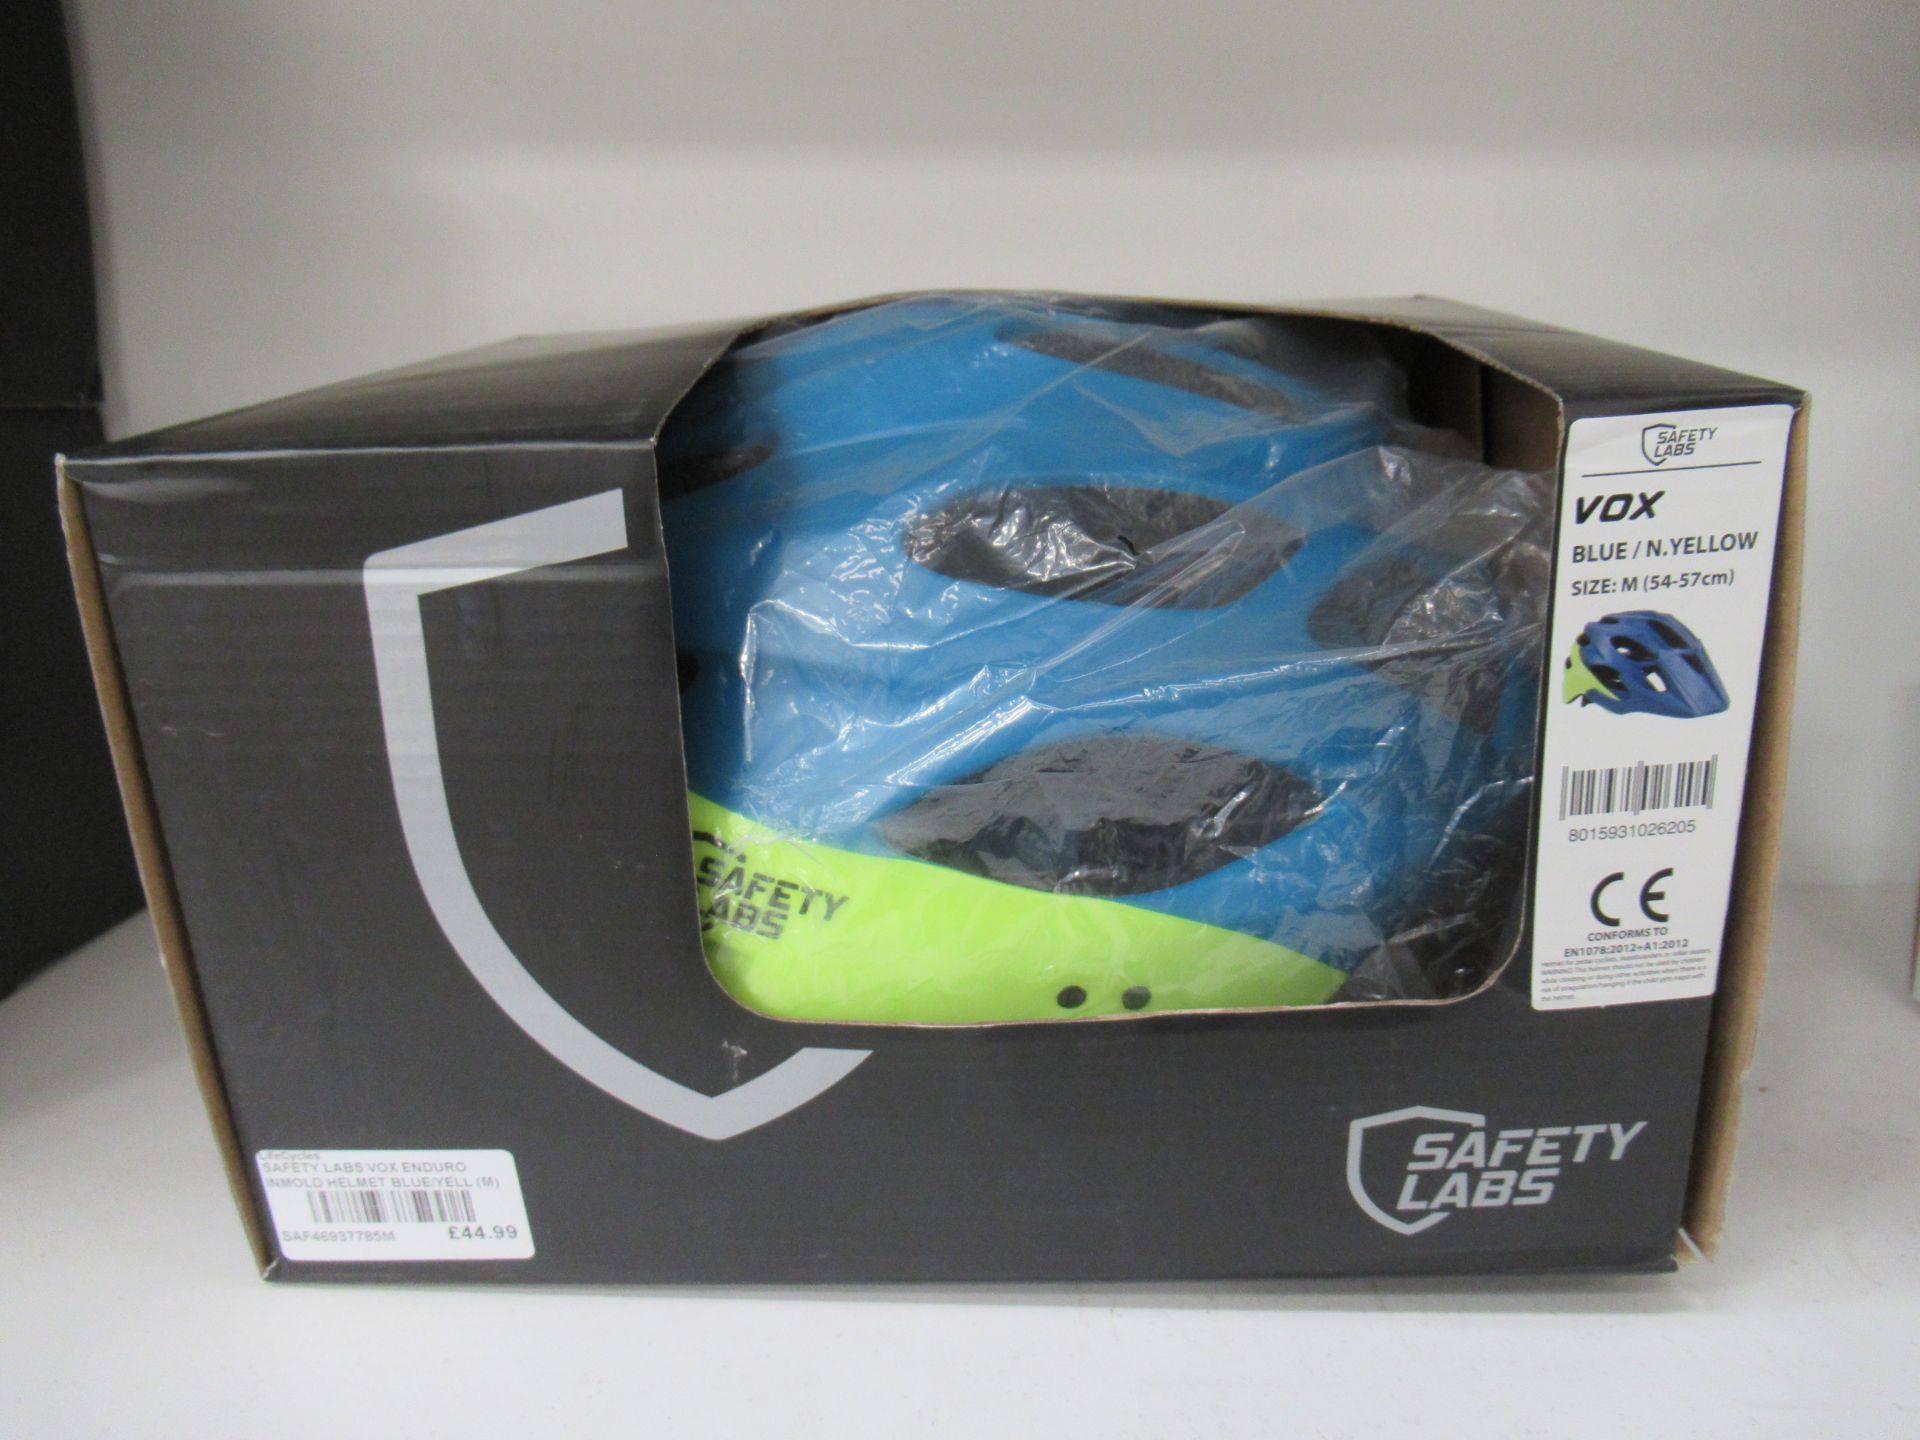 7 x cycling helmets - 3 x unboxed and 4 x Safety Labs VOX helmets: 3 x Blue/Neon Yellow (2 x medium; - Bild 6 aus 8